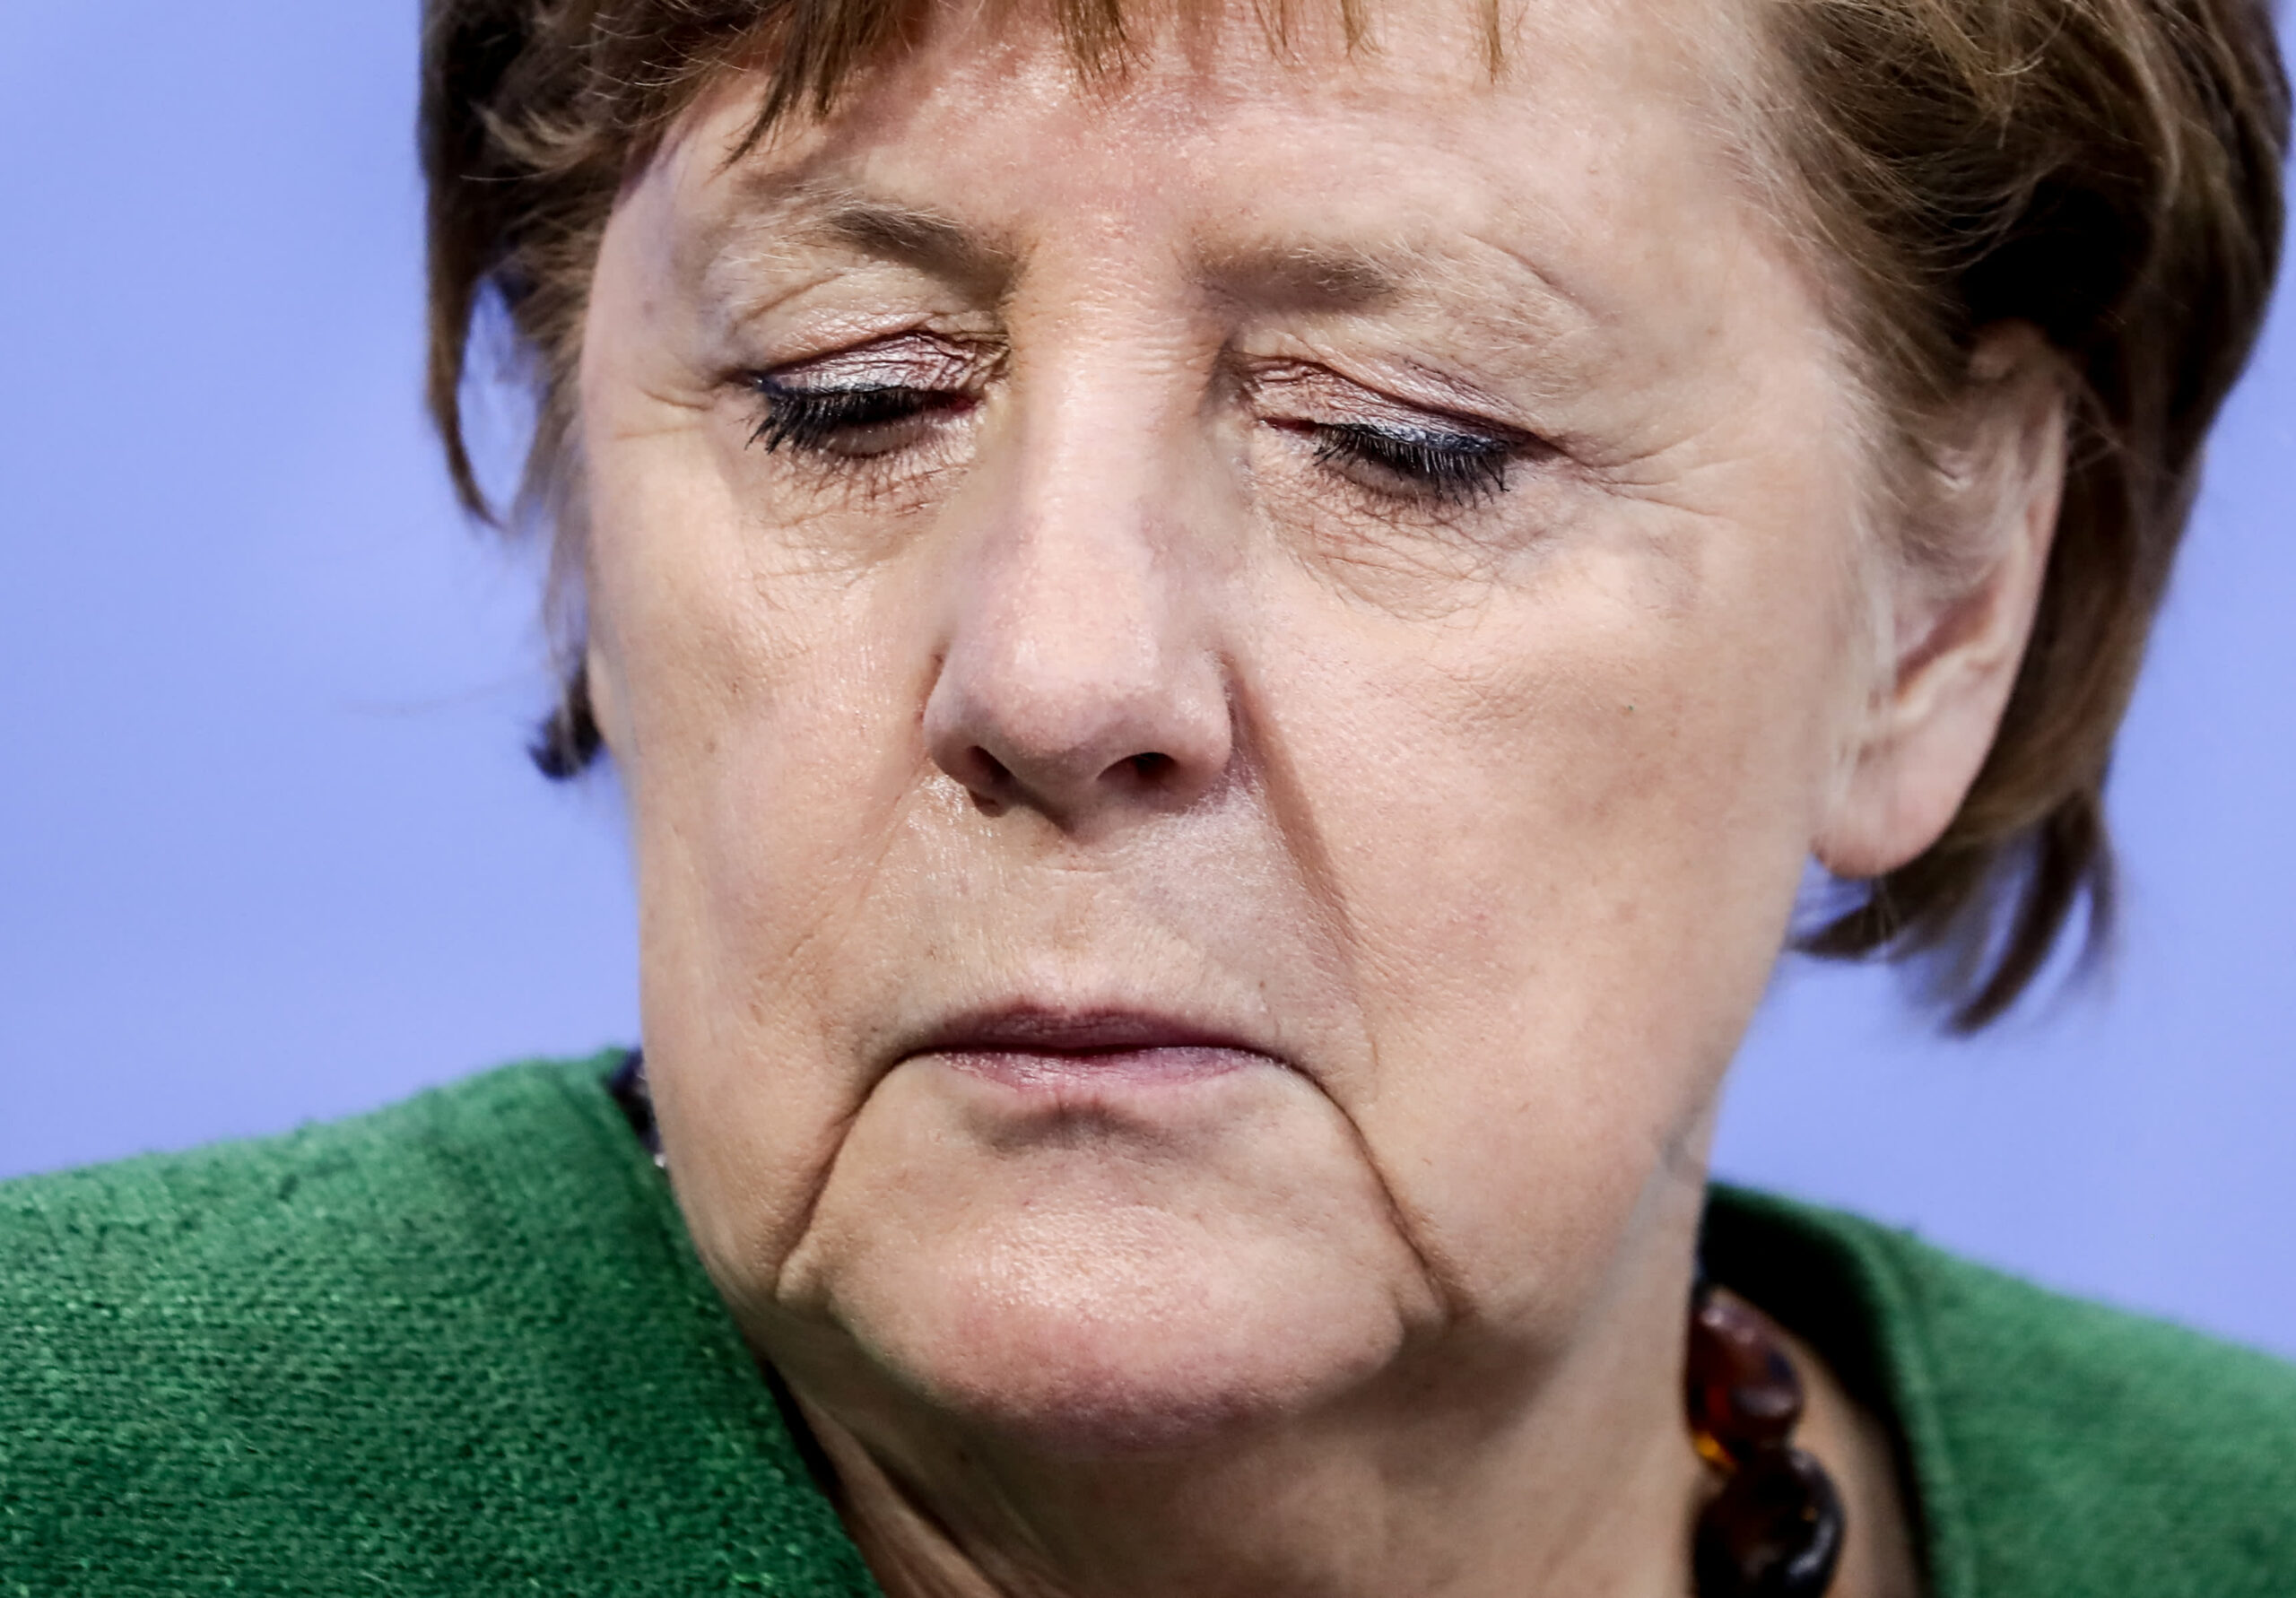 Germany’s Merkel and CDU/CSU reputation falls in the course of the pandemic